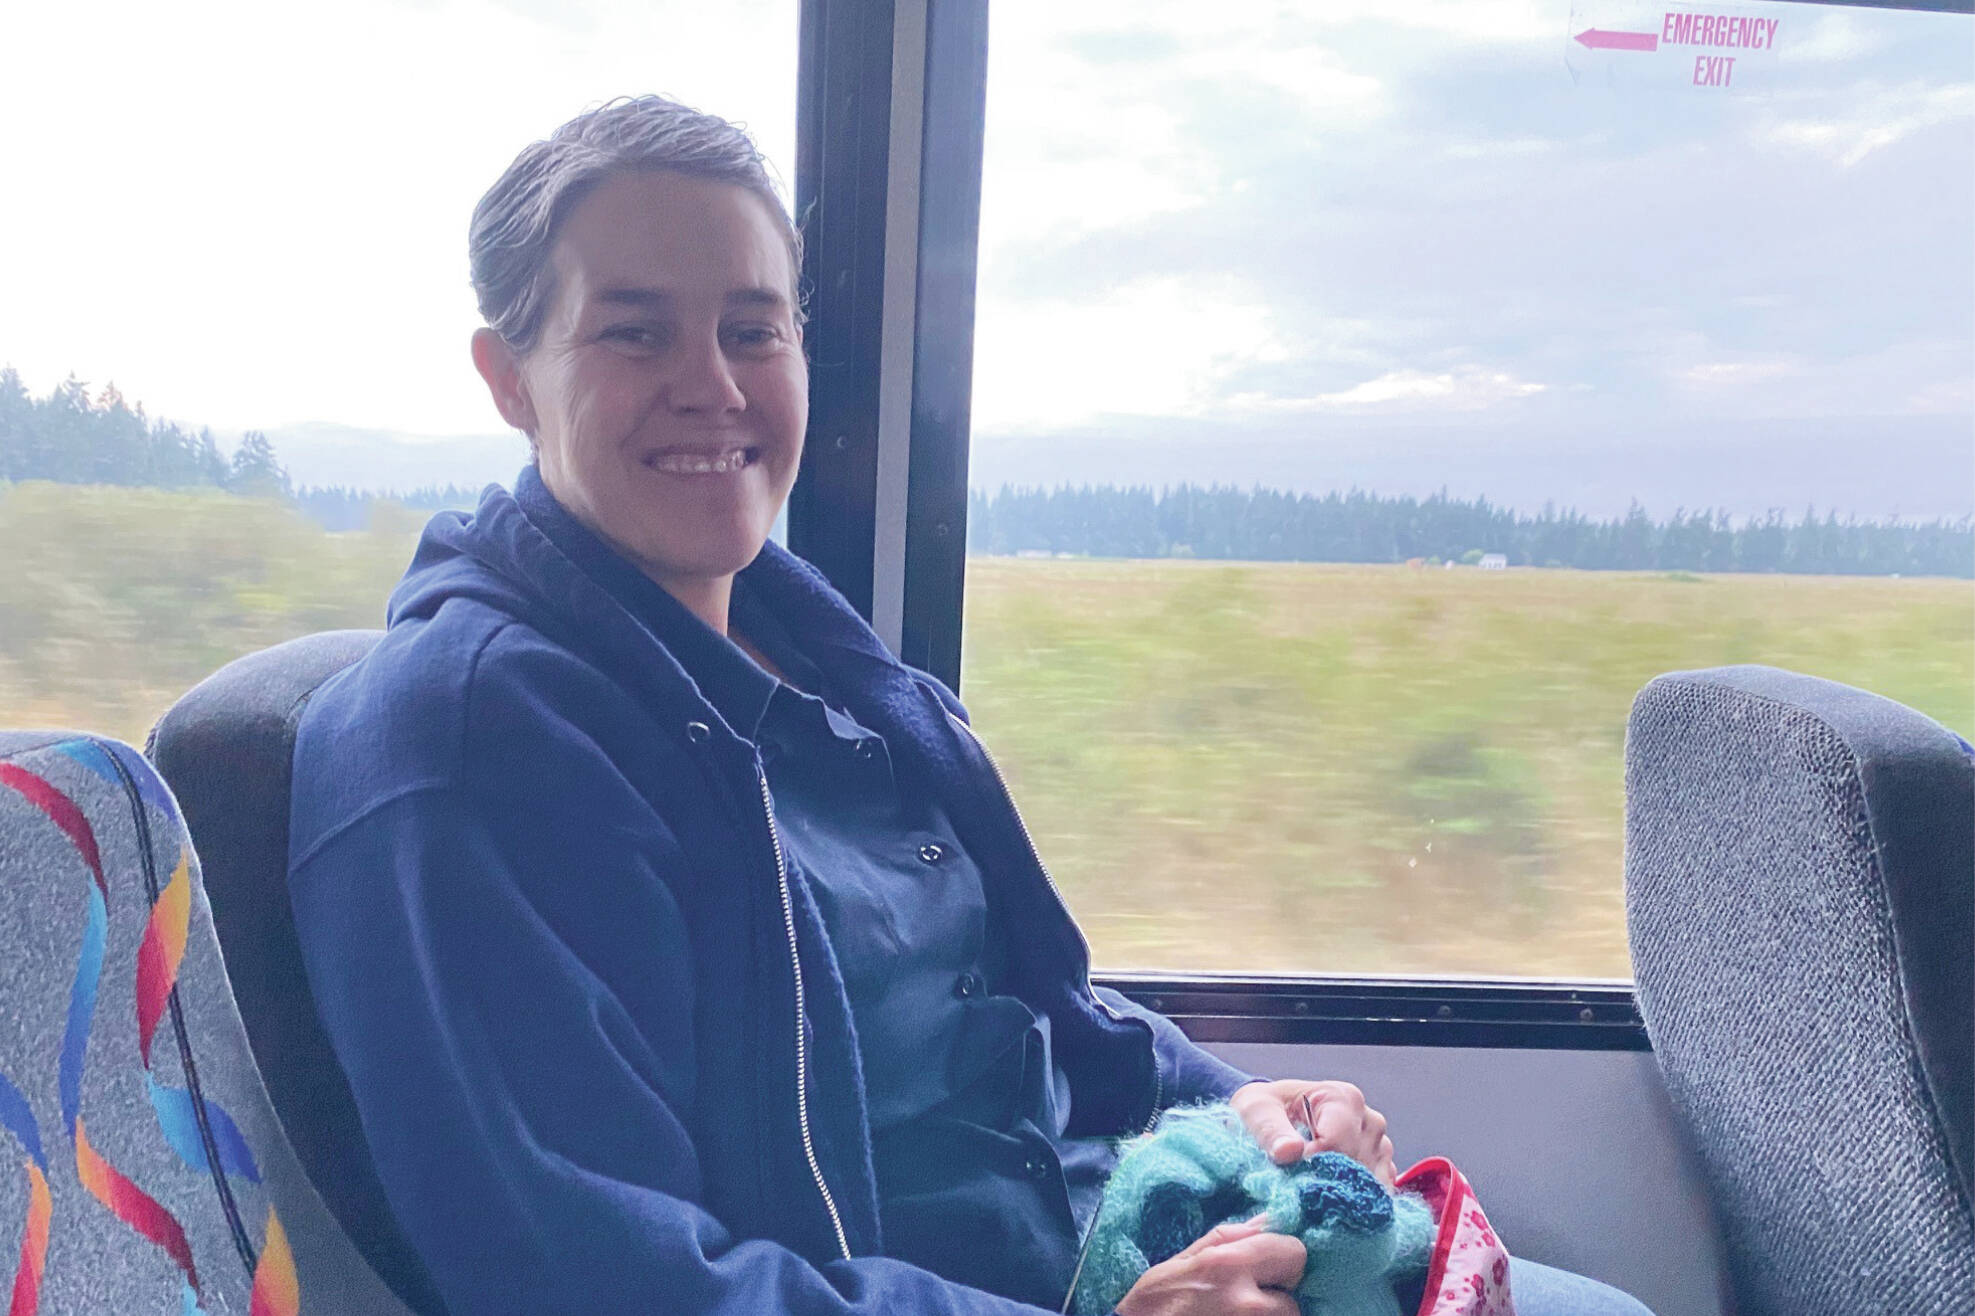 Michele knits and listens to music during her weekday Island Transit commute for her work with the Public Health Department.